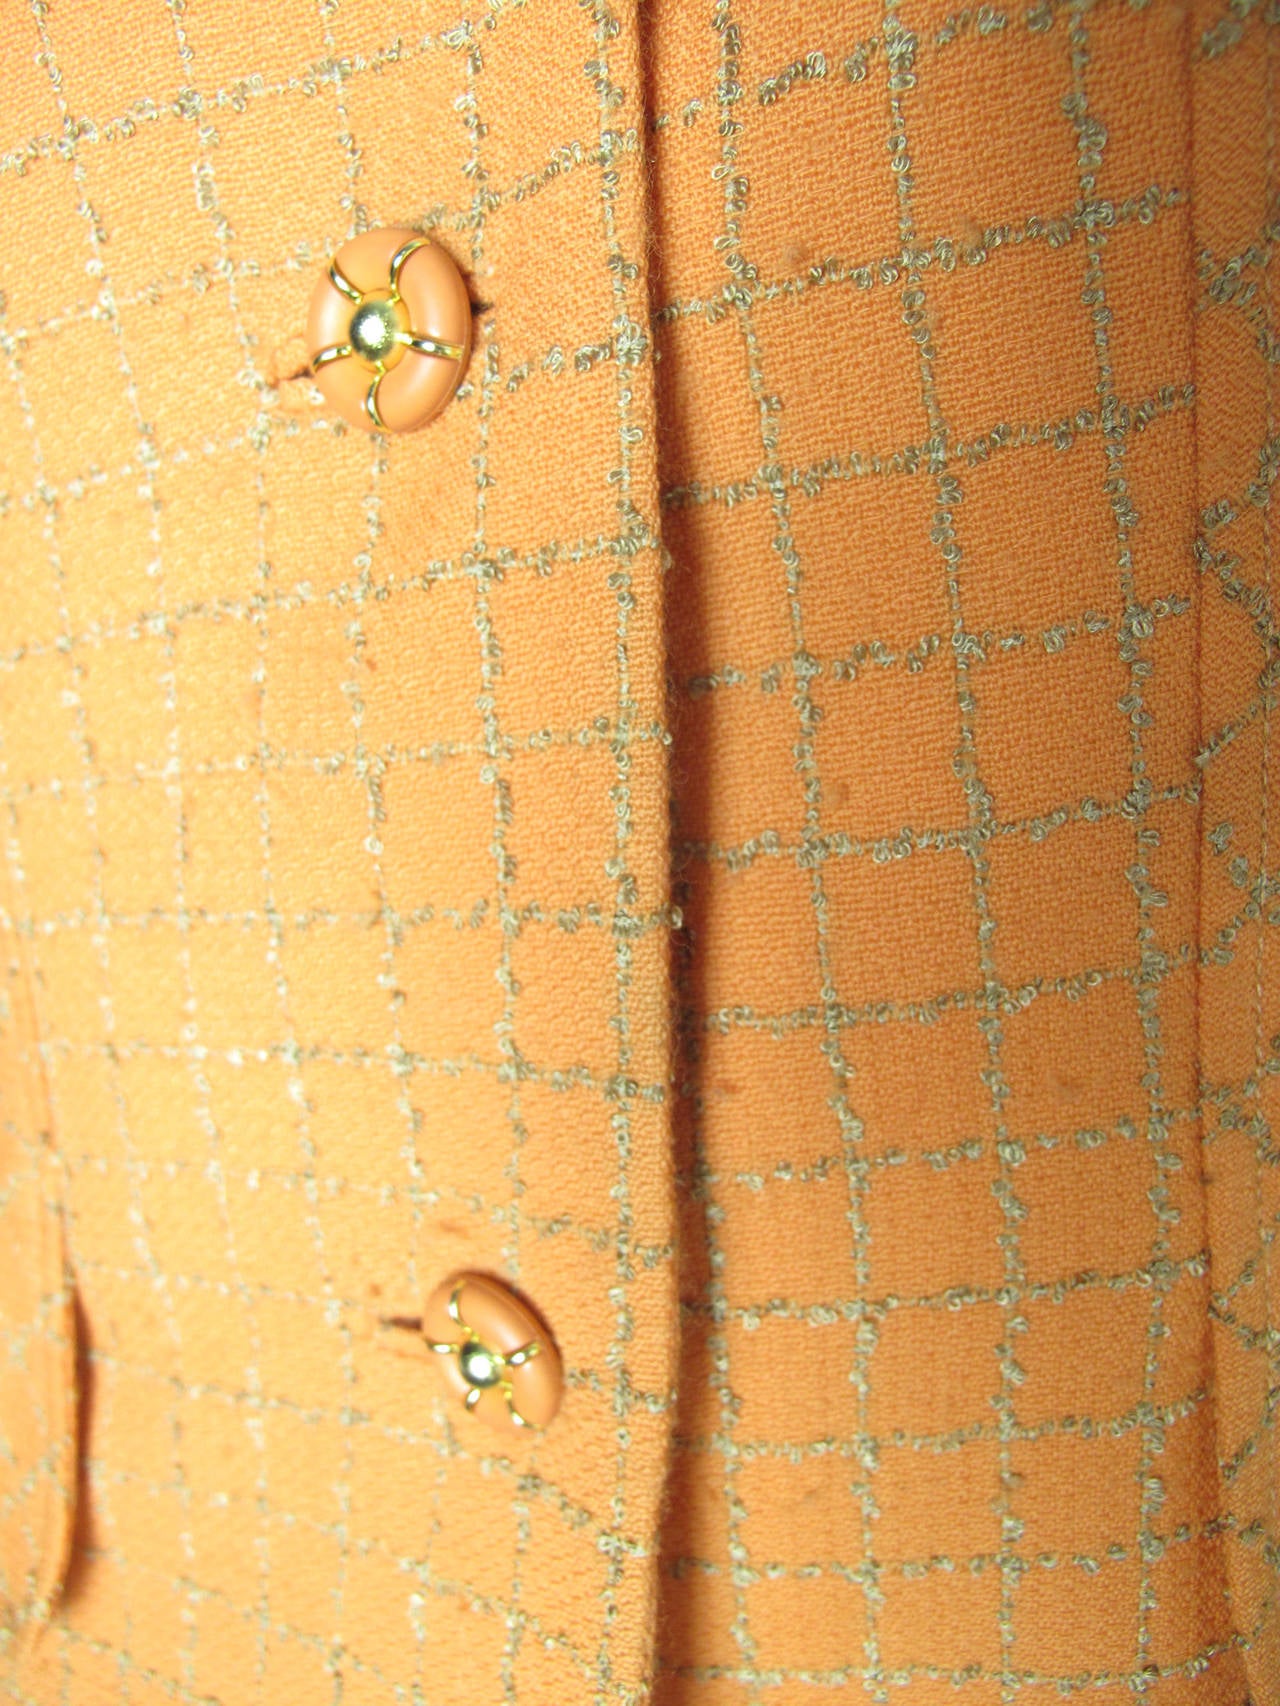 1970s Travilla orange and tan plaid suit. Condition: Very good. Size 10

Skirt: 30 